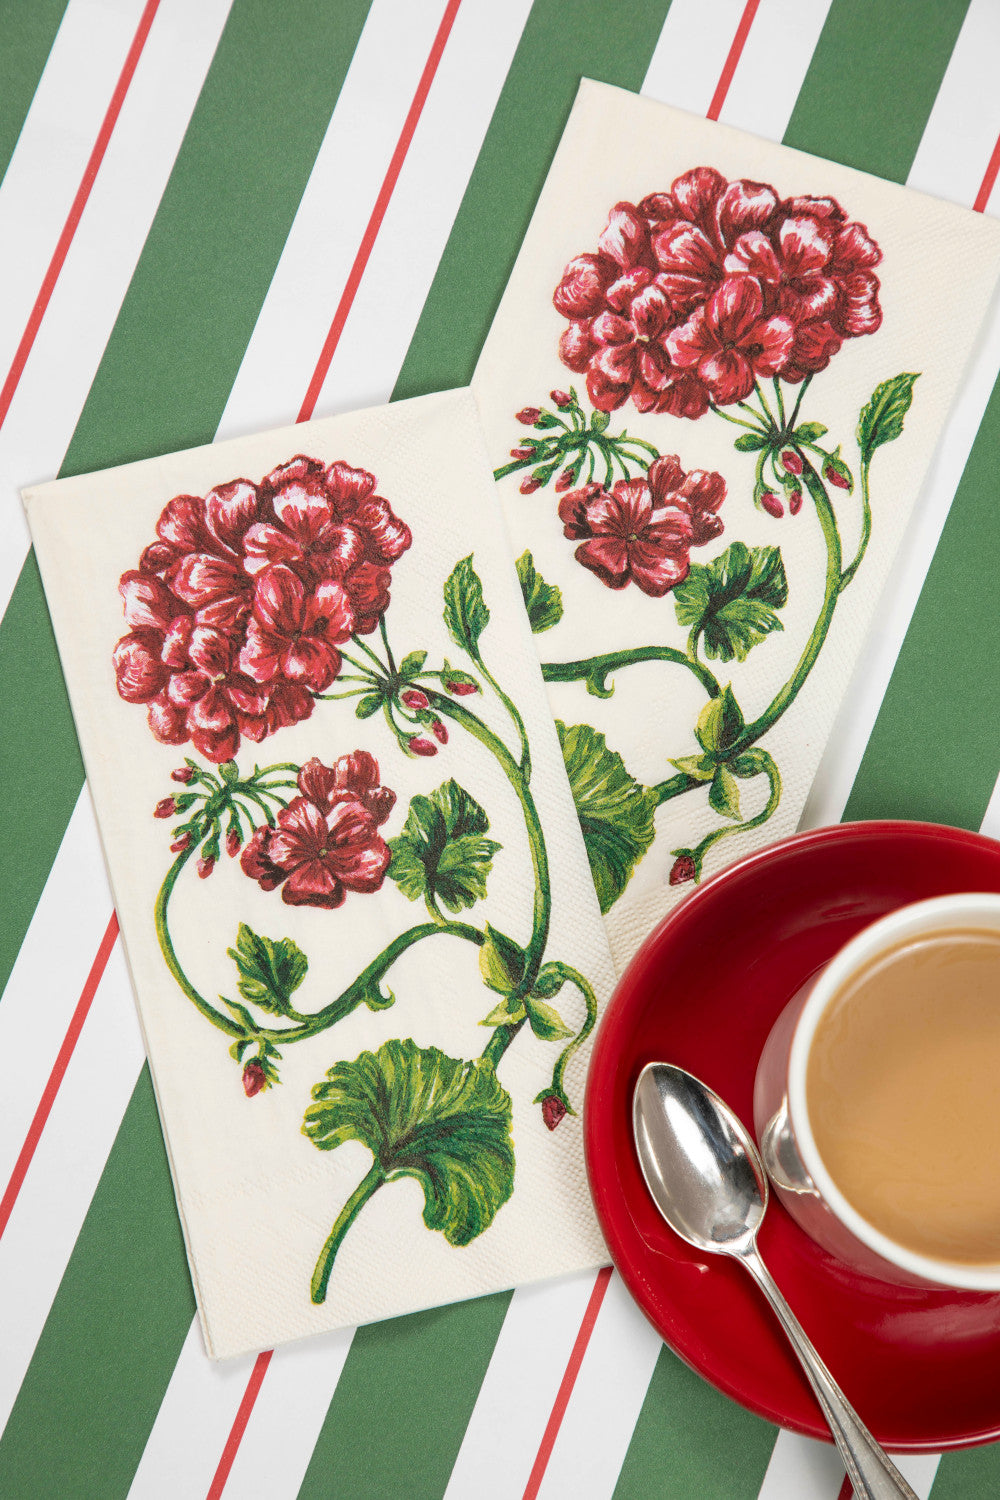 The Green &amp; Red Awning Stripe Runner under a Christmas-themed place setting with a cup of coffee.